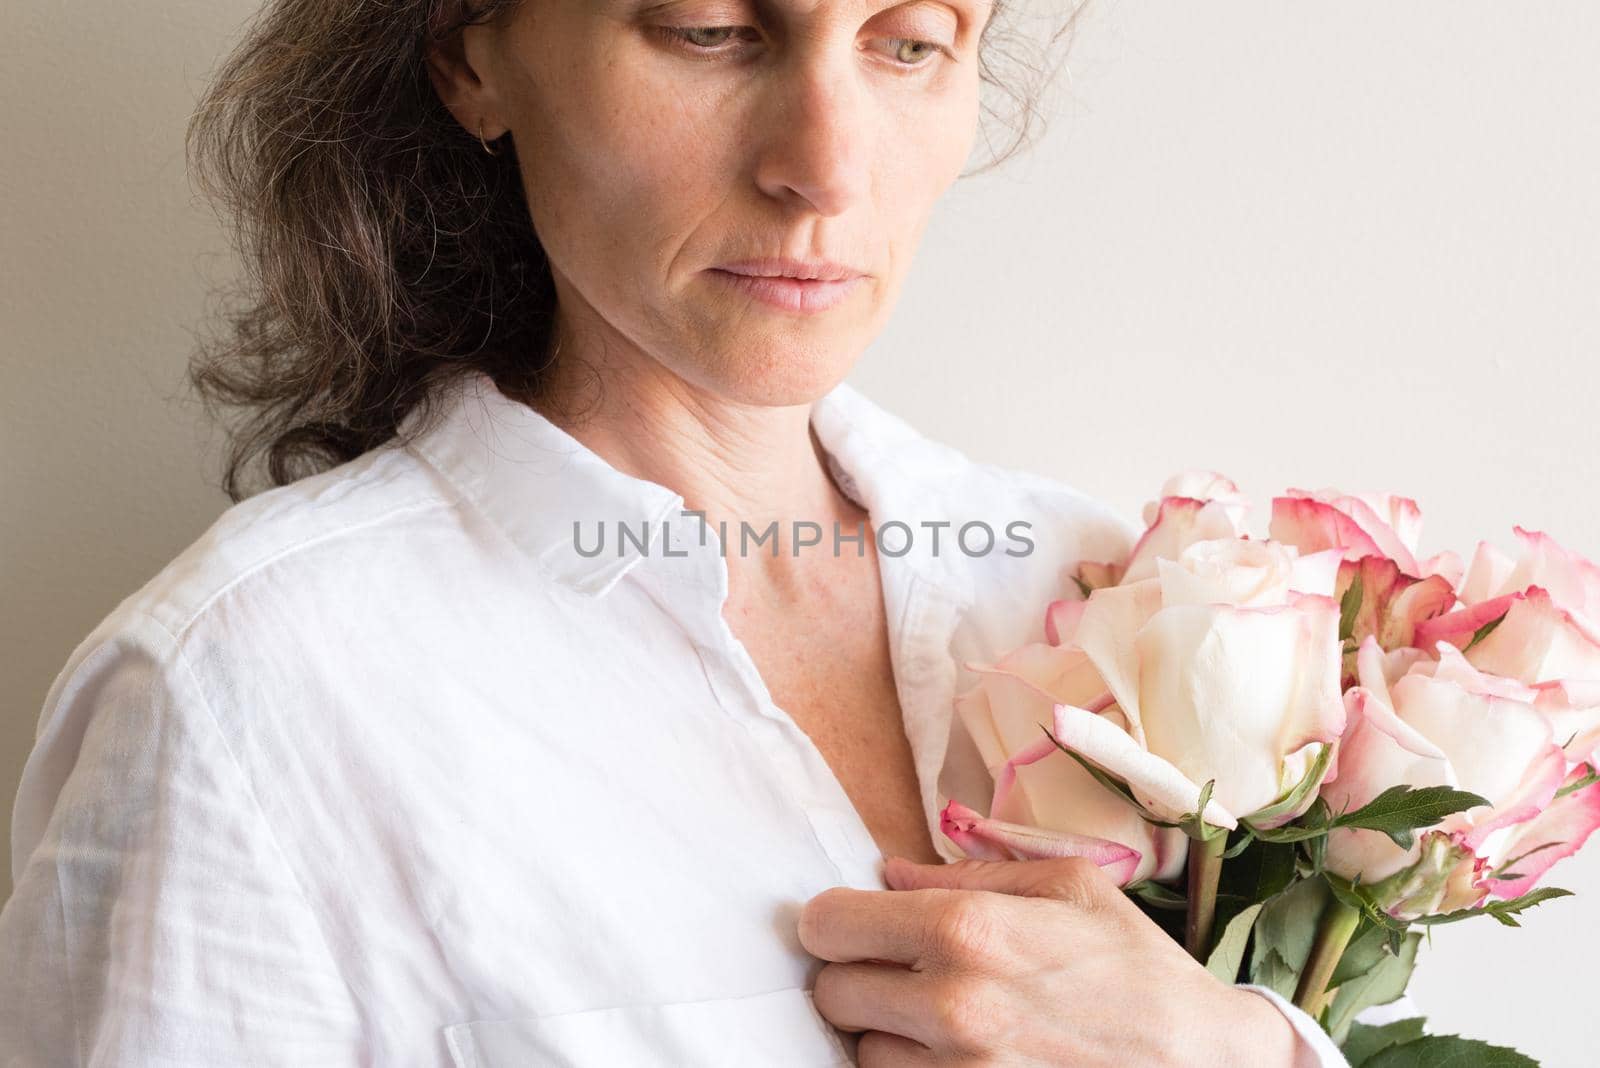 Middle aged woman holding roses and looking pensive (cropped) by natalie_board